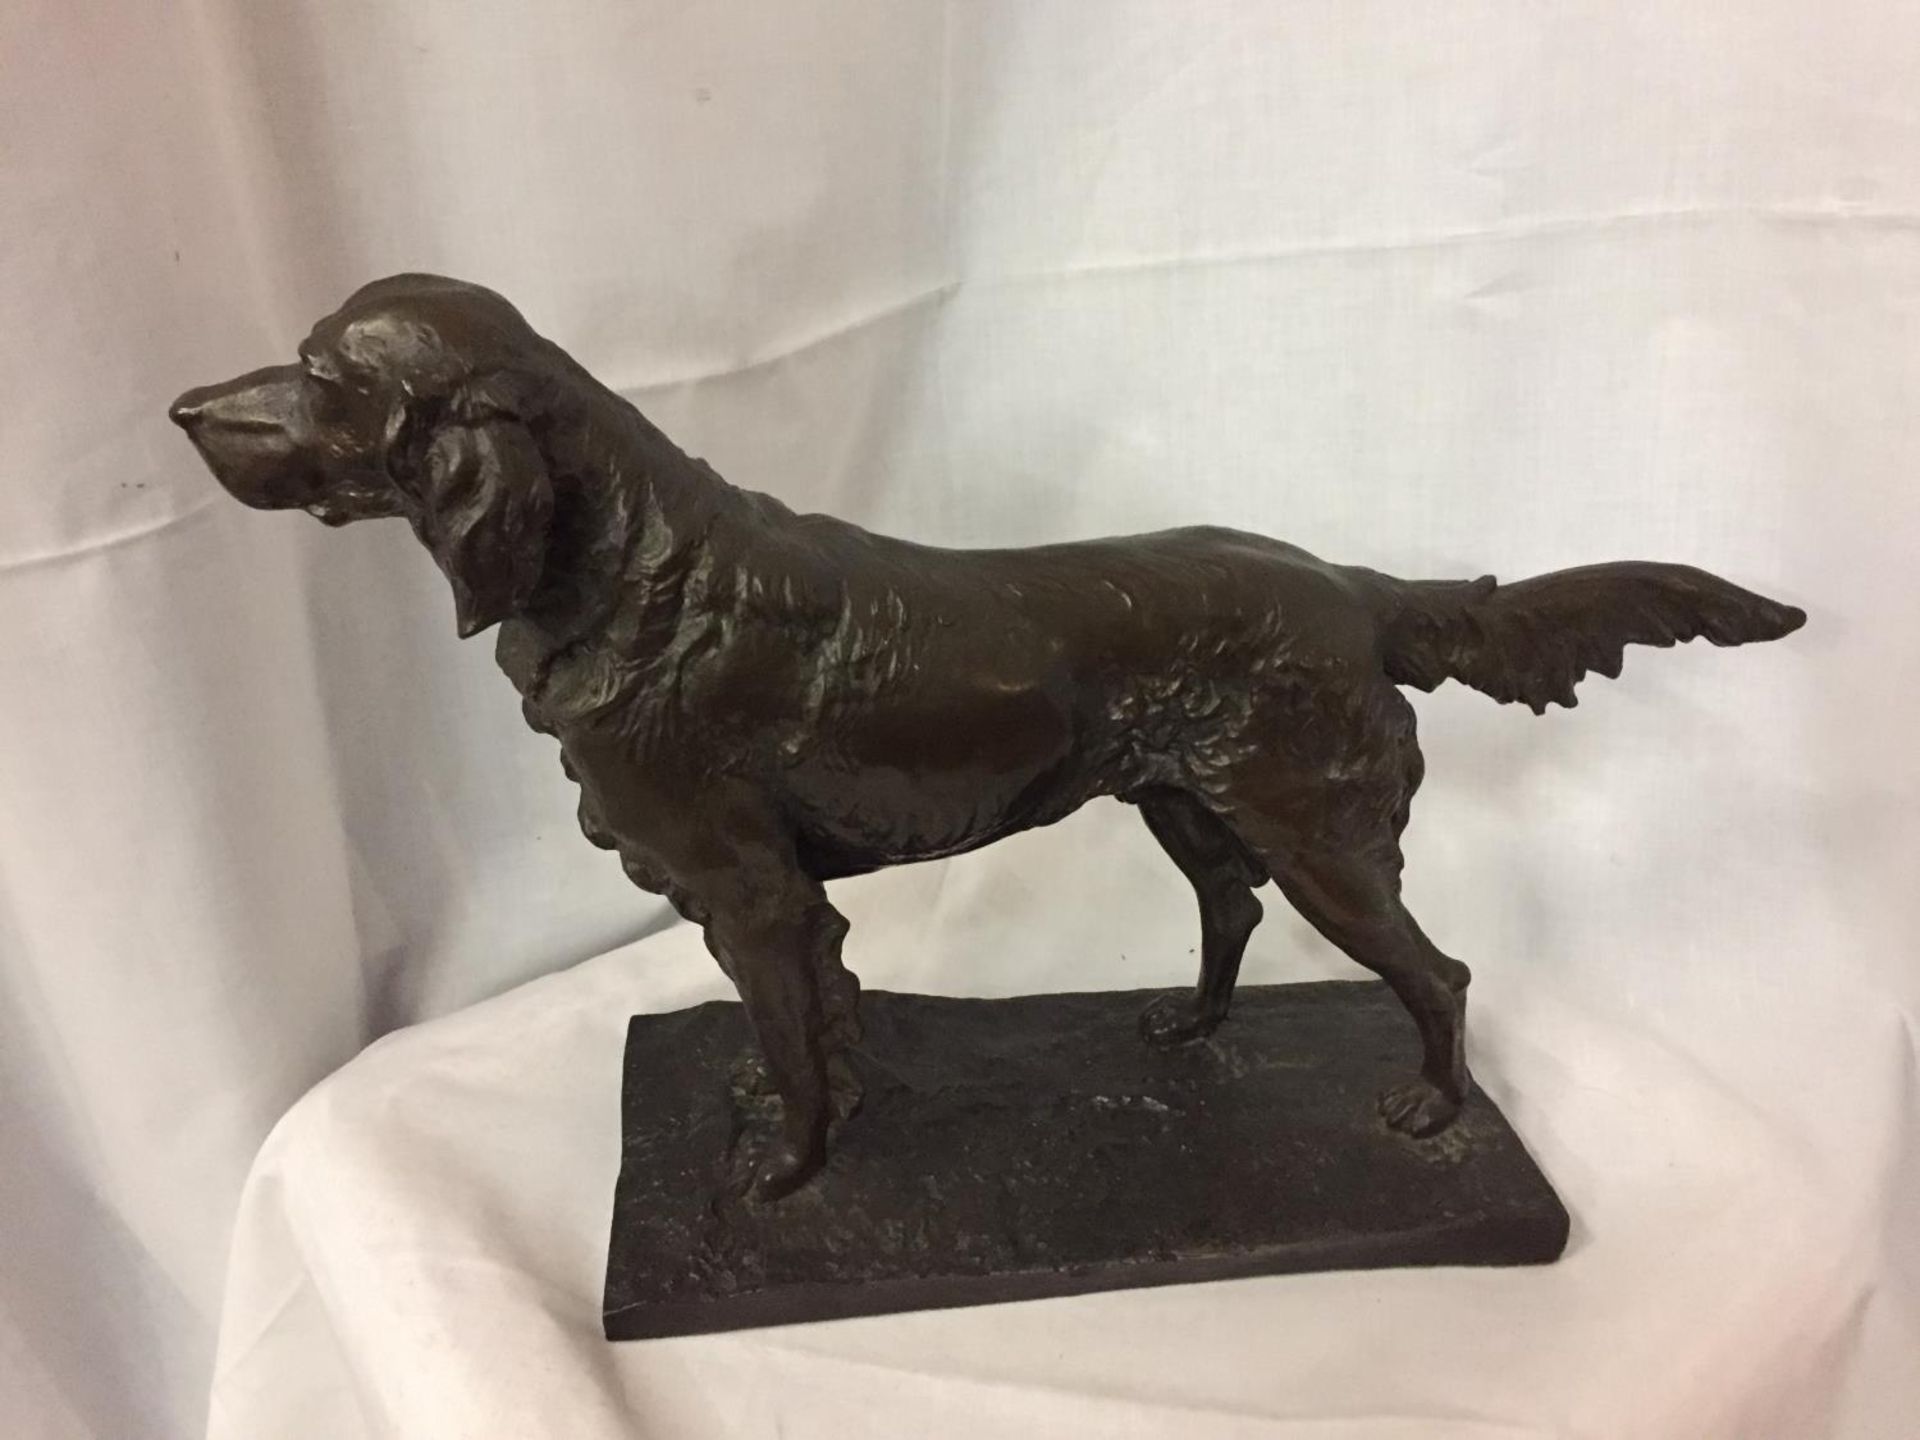 A BRONZE STYLE SCULPTURE OF A RETREIVER DOG. LENGTH 51CM, HEIGHT 35CM - Image 5 of 6